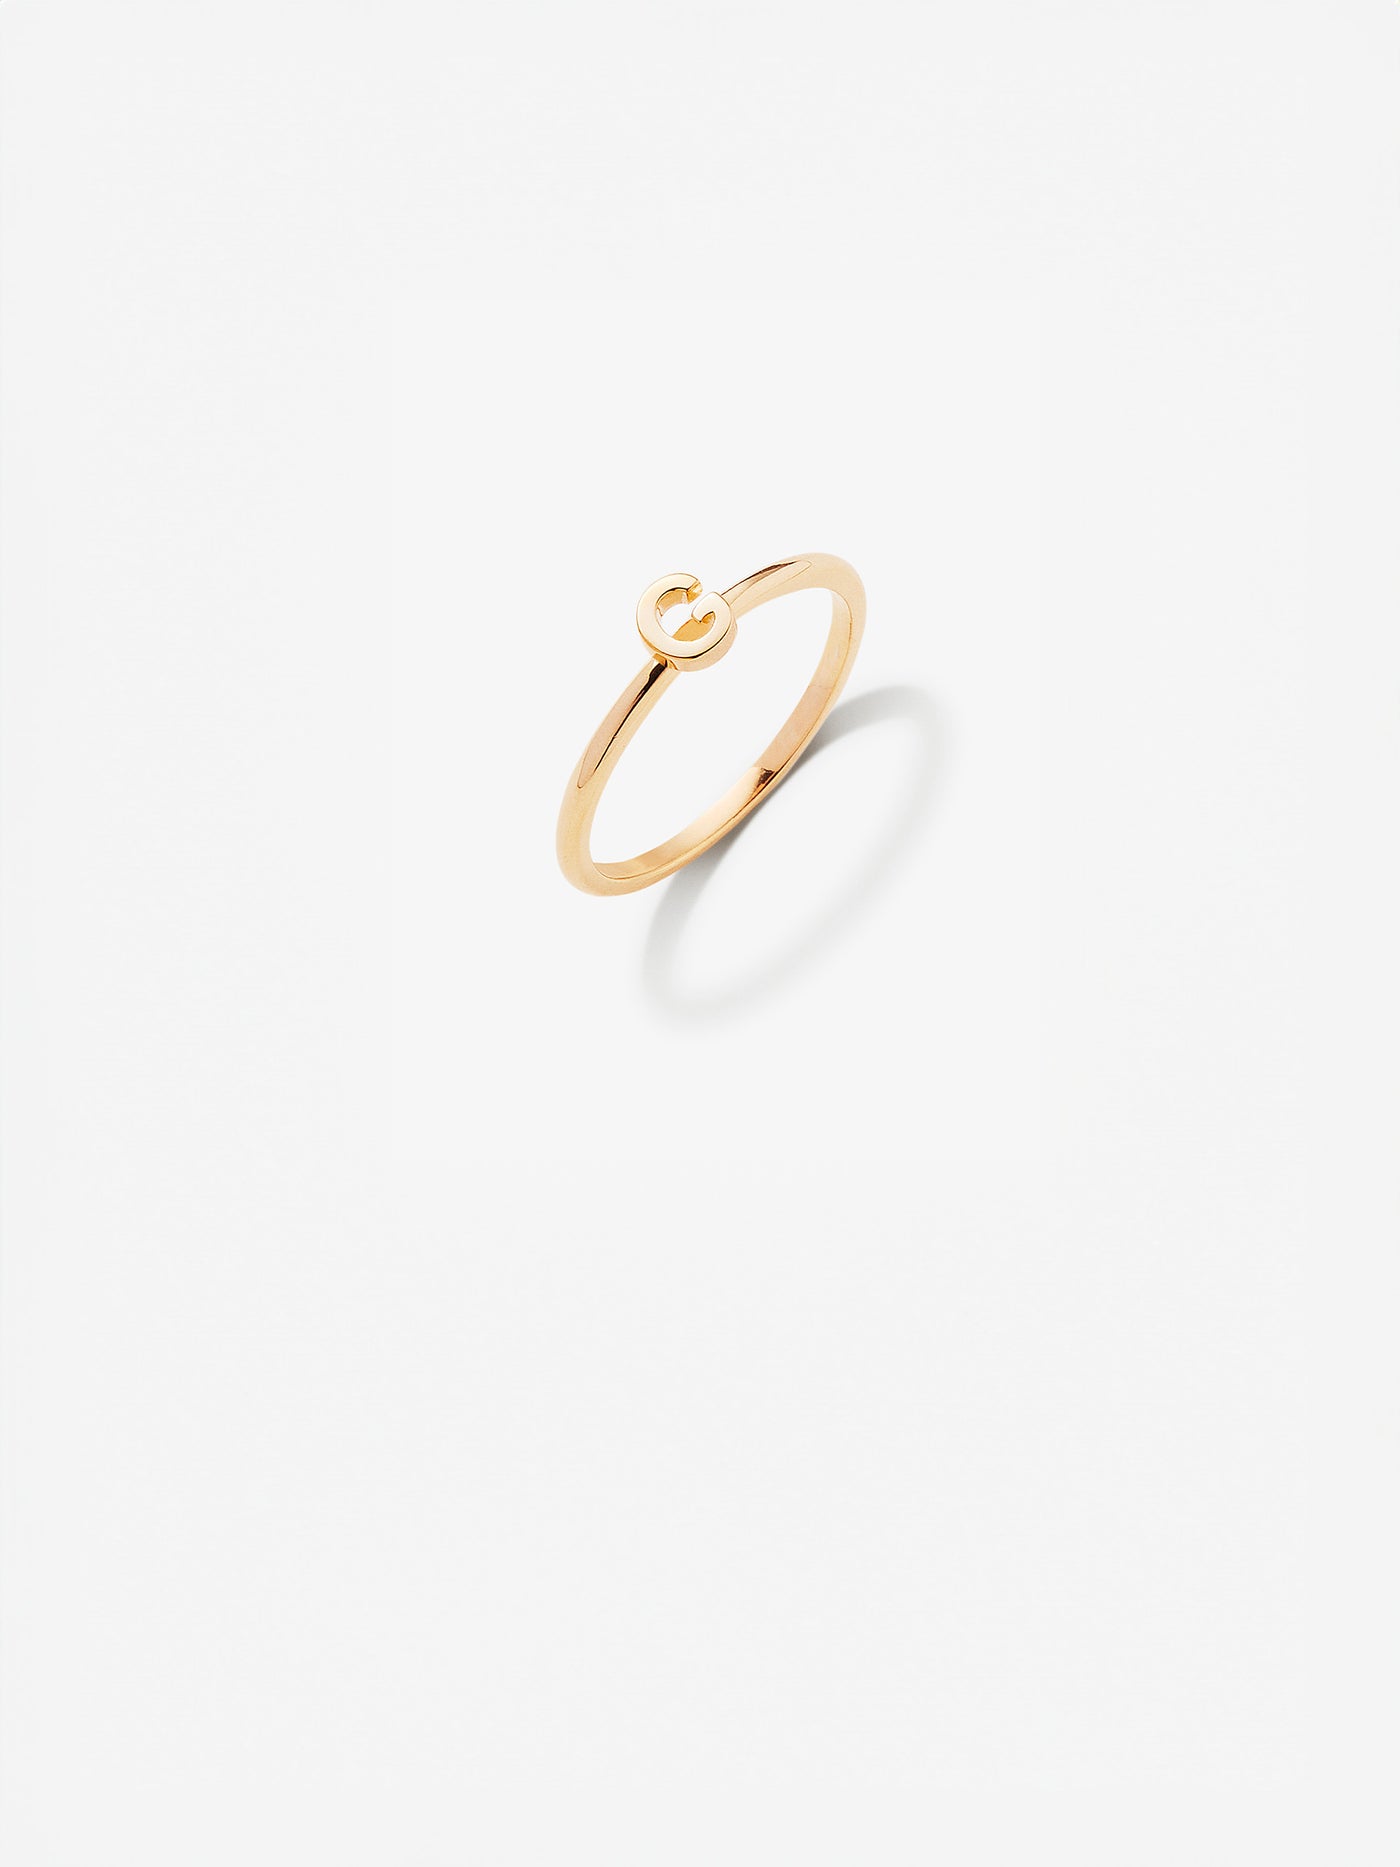 Close-up image of a personalised G gold ring adorned with intricate, miniature dimensional letters from the alphabet on a light grey background 